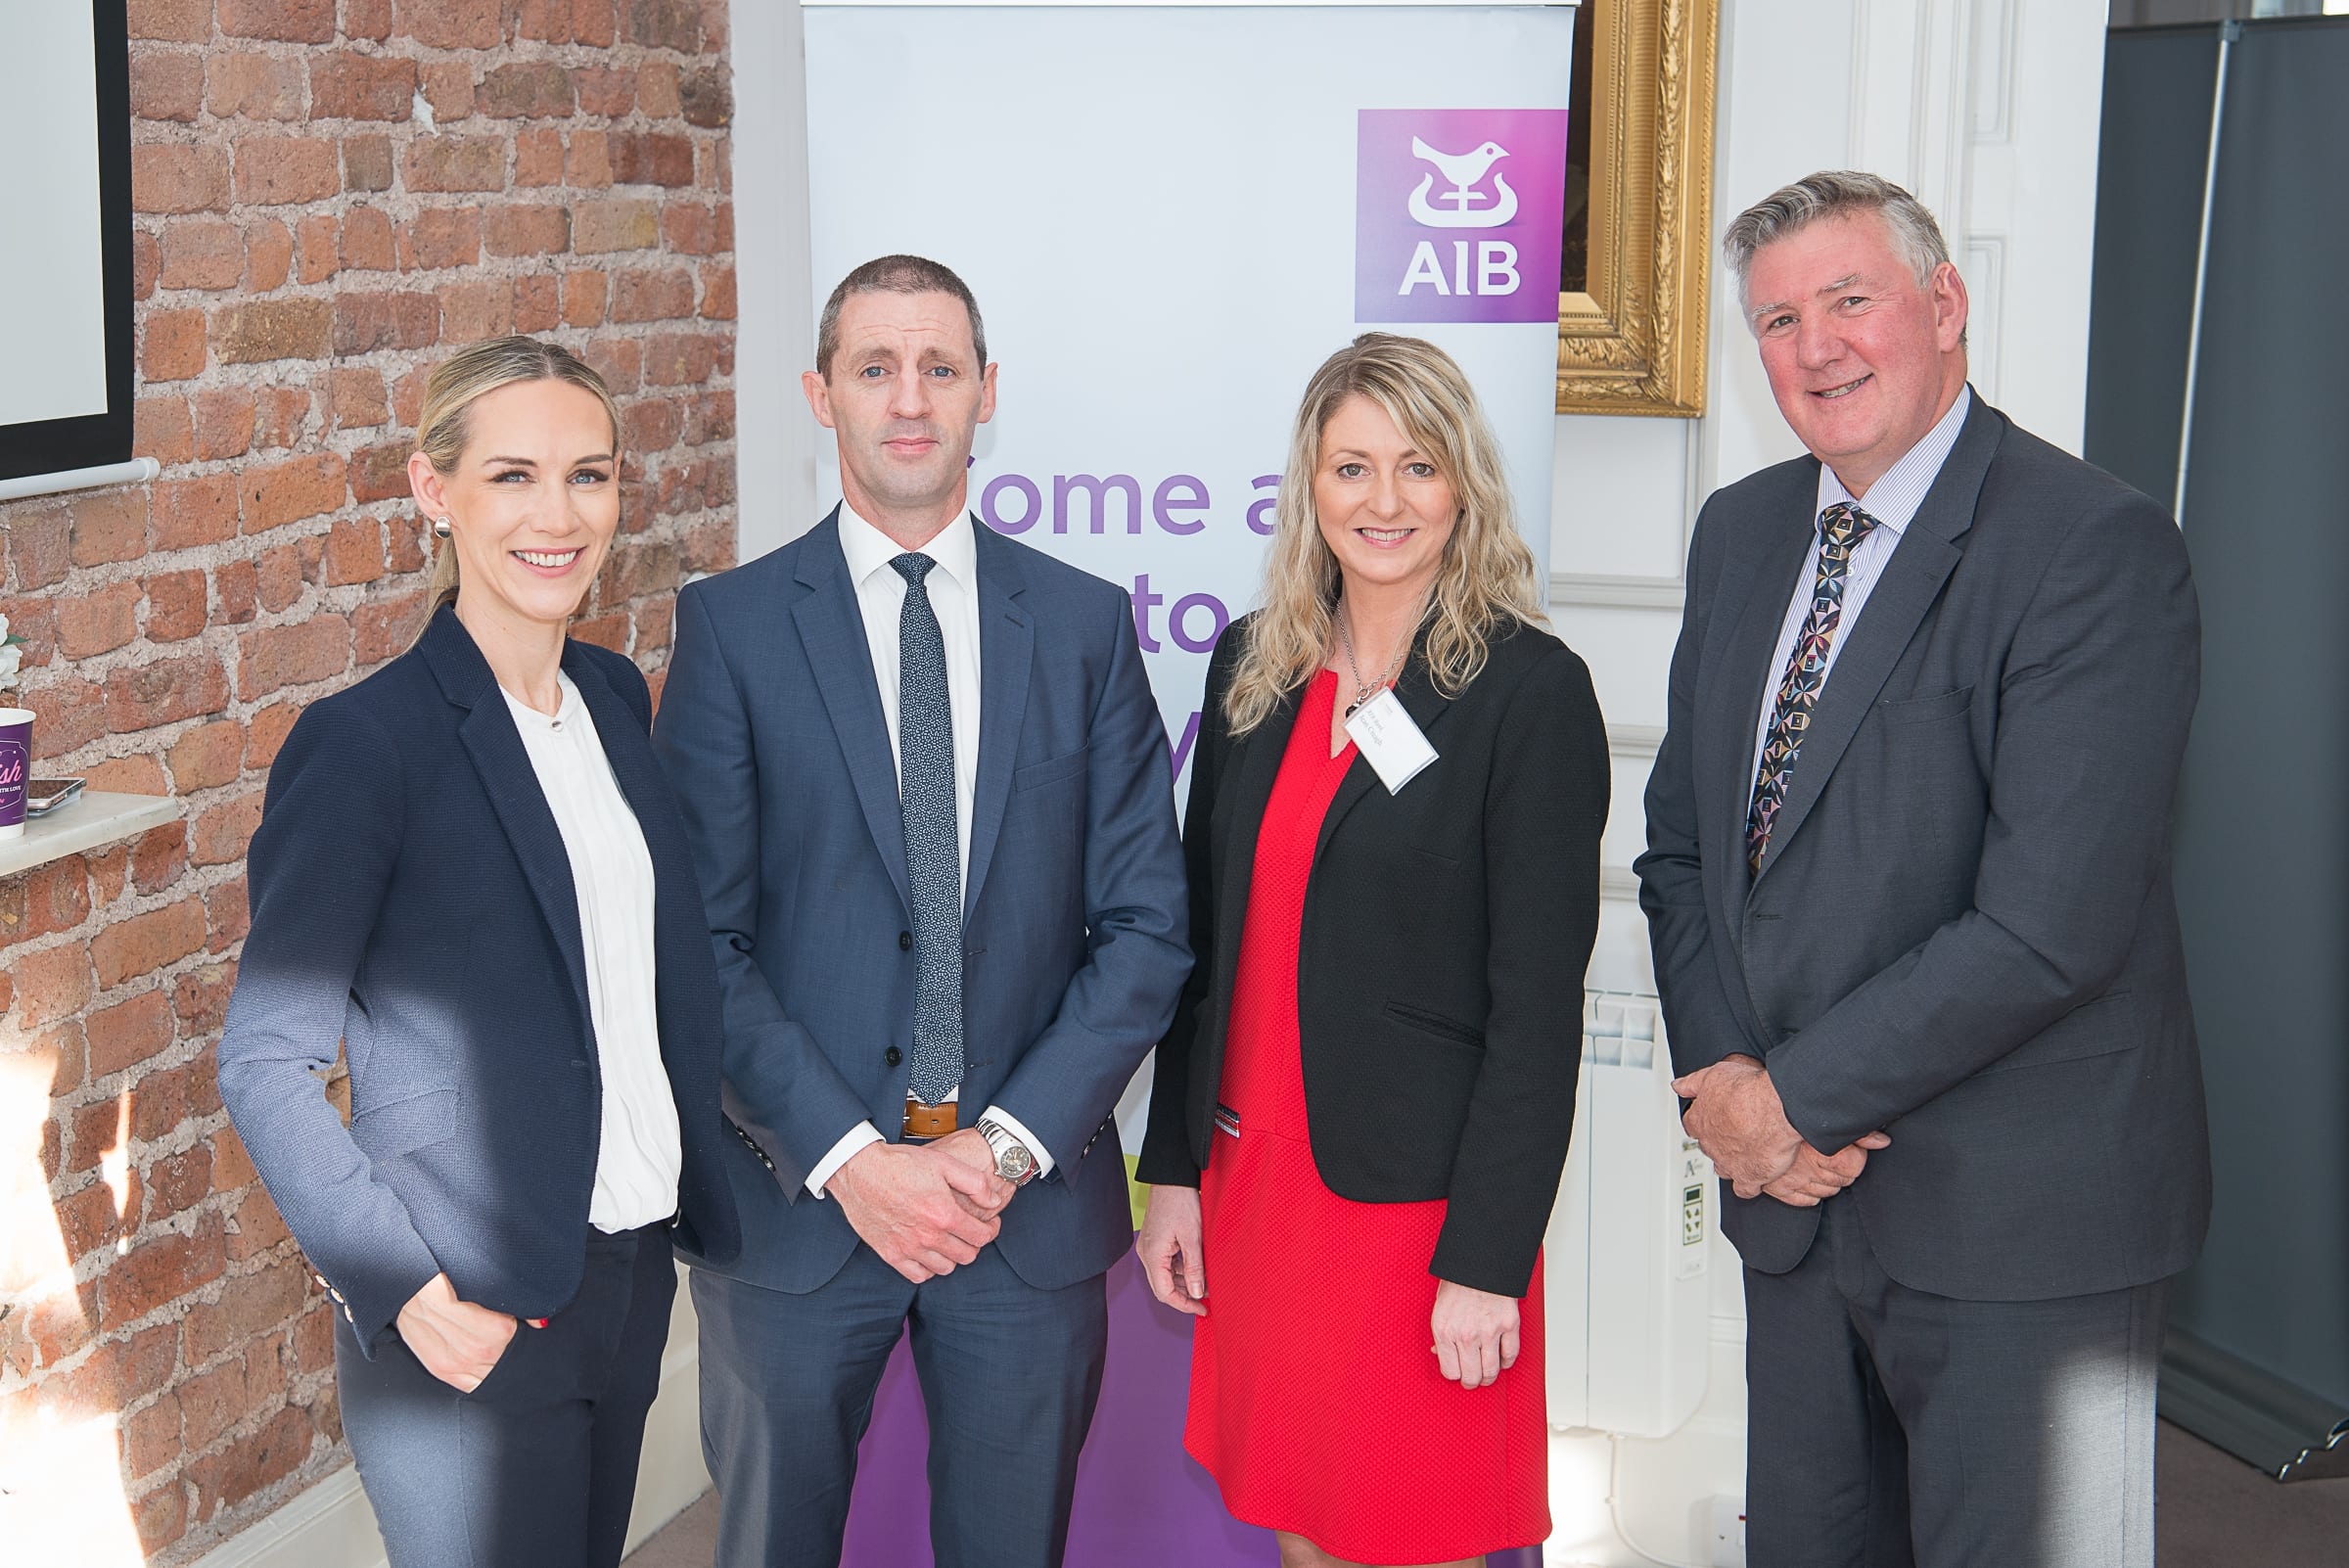 no repro fee- 
From Left to Right:  New Members Breakfast which took place on the 7th June in the Limerick Chamber Boardroom:  Dee Ryan - CEO Limerick Chamber, Kieran Considine - AIB,  Jean Creagh - AIB, Dermot Graham - AIB,
Photo by Morning Star Photography